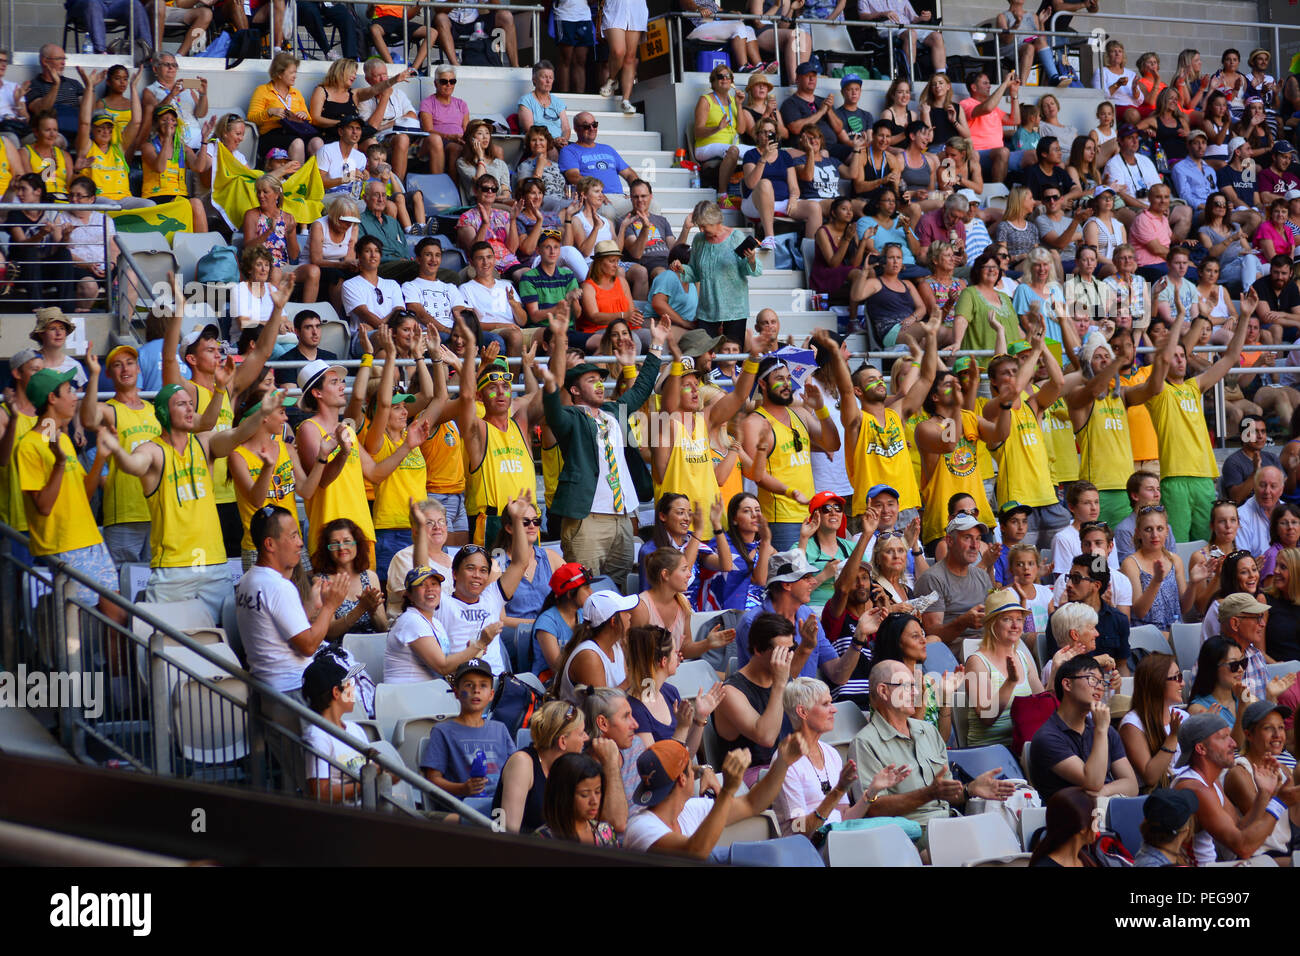 People cheer for the tennis players in Australian Open, Melbourne Stock Photo